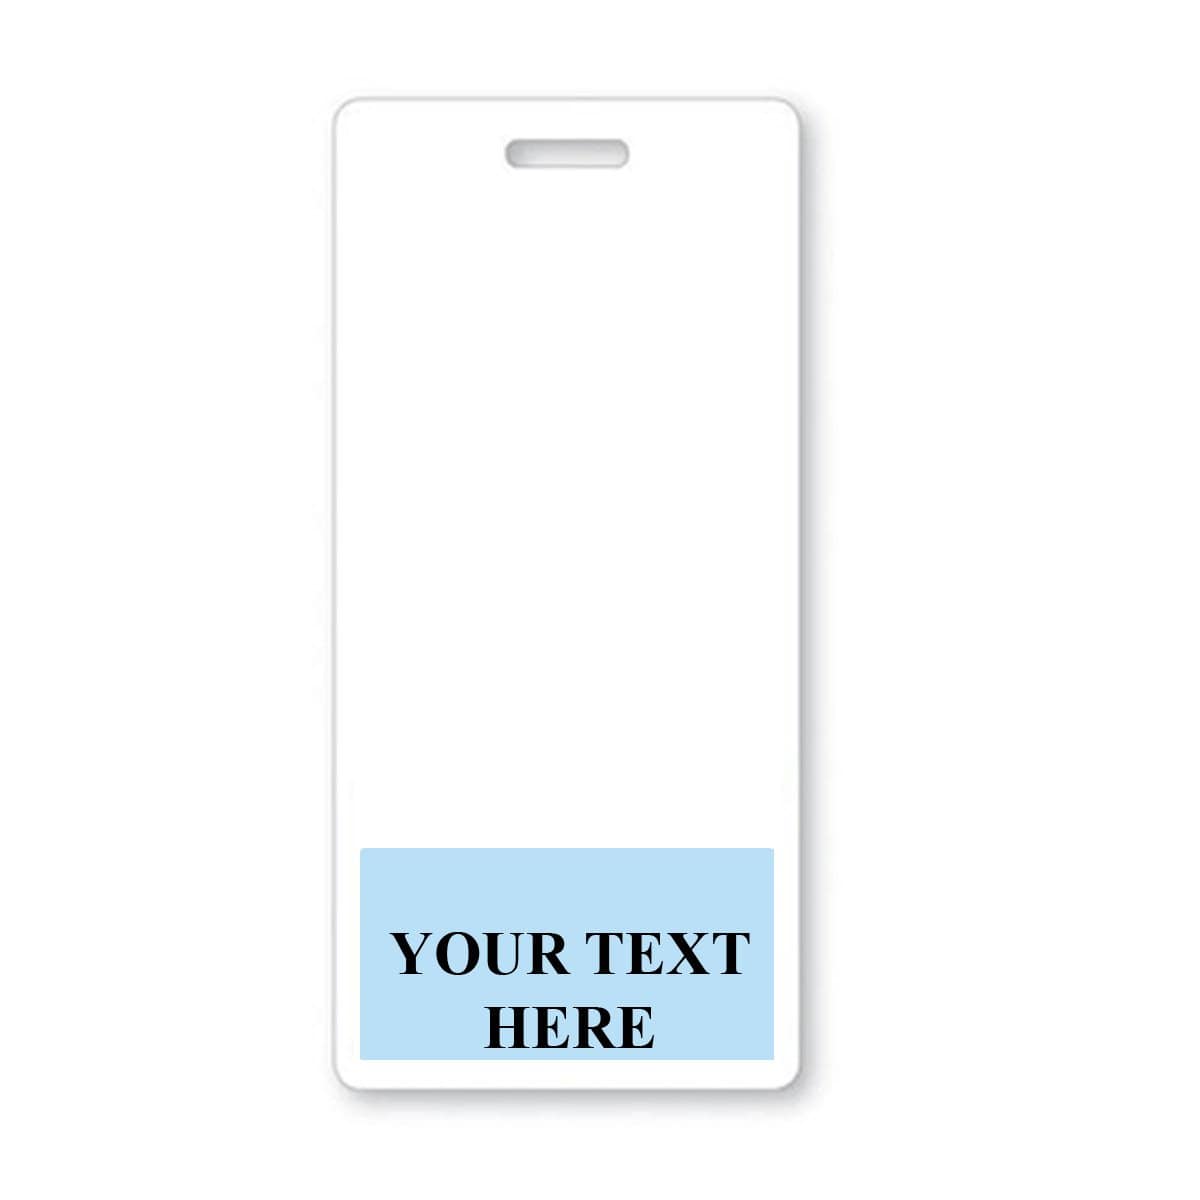 A Custom Printed Badge Buddy Vertical (Standard Size) with a slot for a lanyard and a blue area at the bottom labeled "Your Text Here," perfect for custom badge buddies or instant roll recognition.